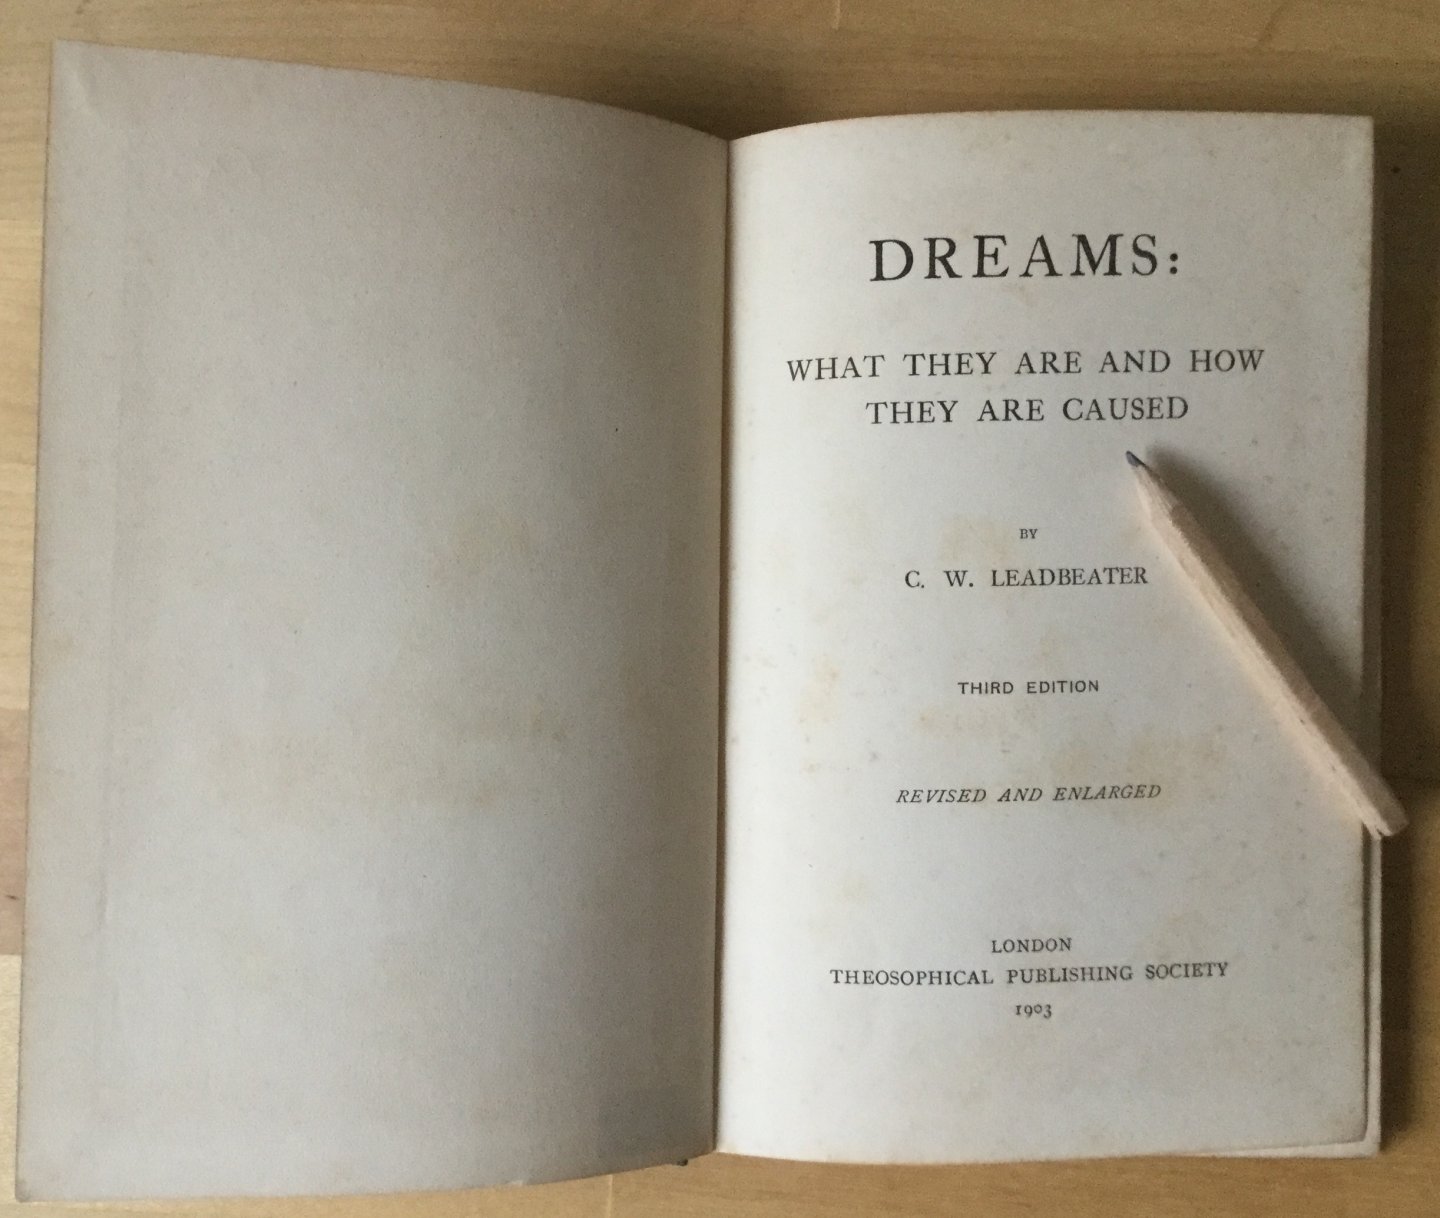 Leadbeater, C.W. - Dreams; what they are and how they are caused